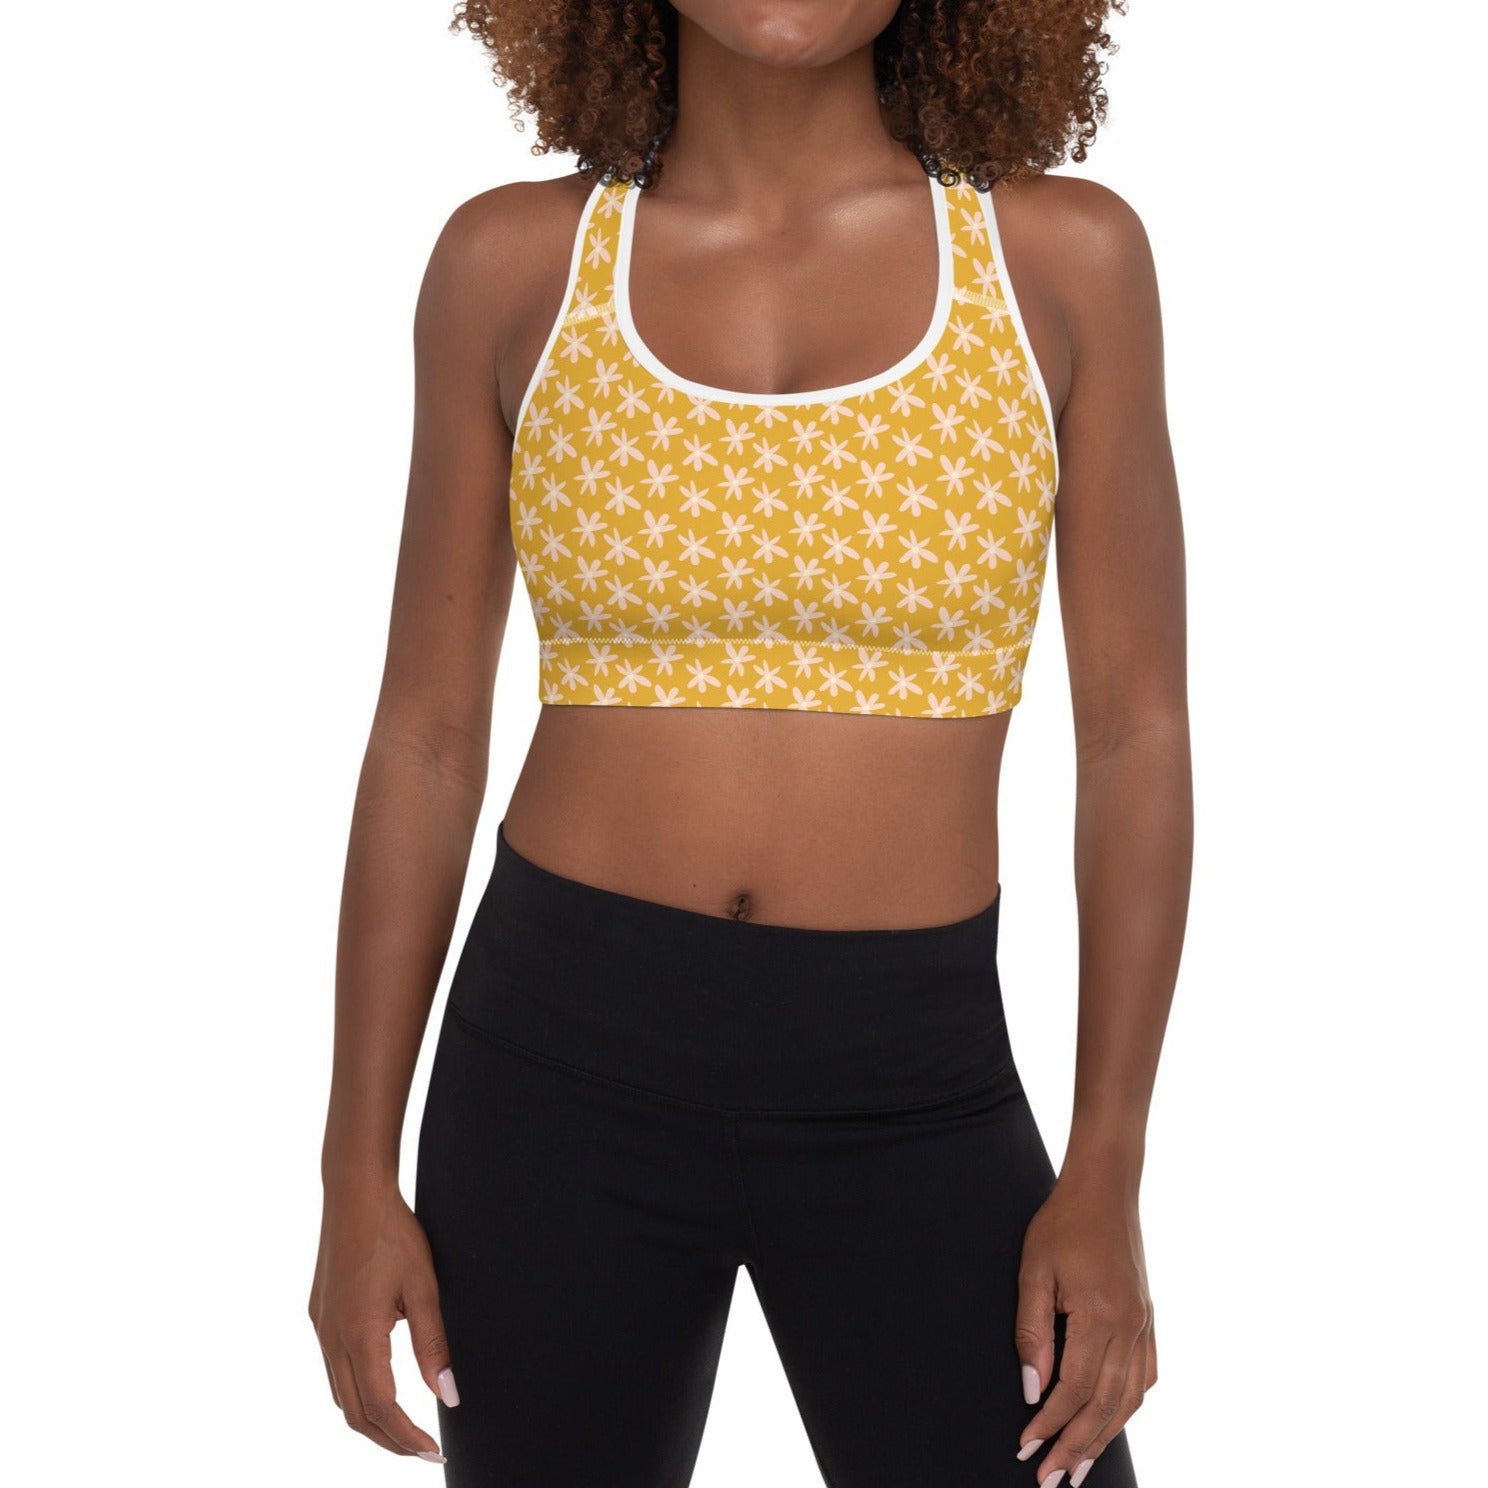 Women's 70s Vintage Sports Bra for Yoga, Active Workouts XS-2XL - Yellow  Daisies